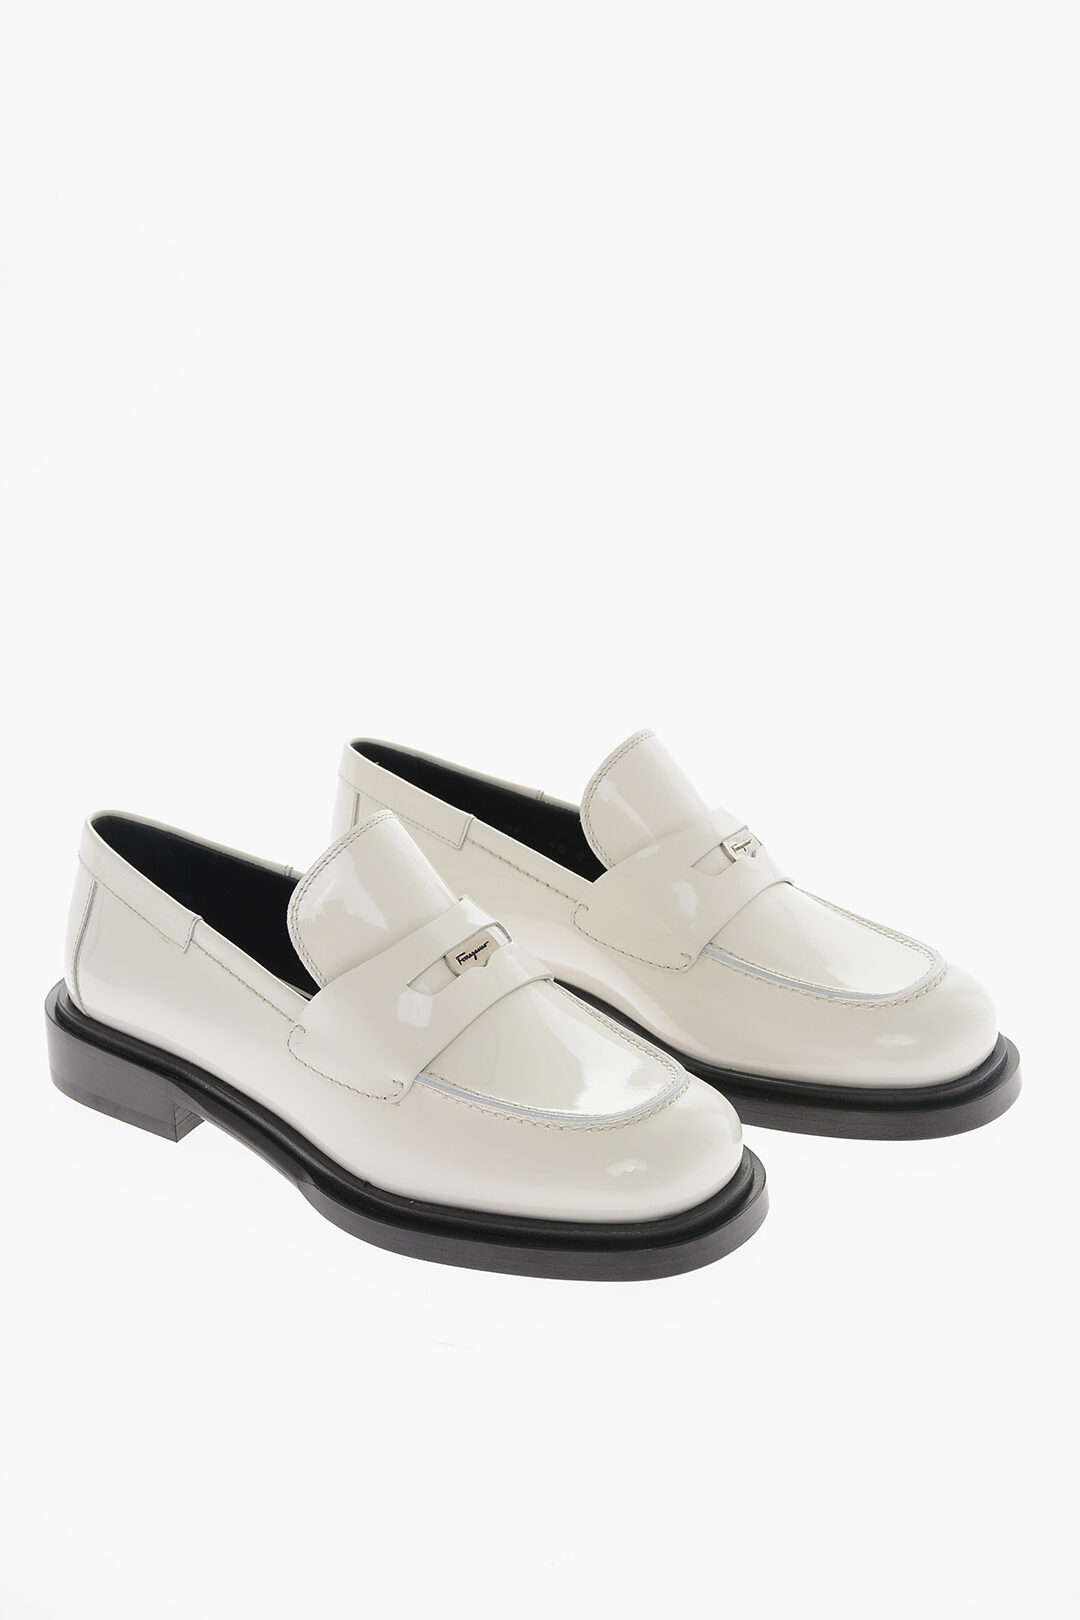 Salvatore Ferragamo Patent Leather NYX Loafers with Logo Application - Outlet